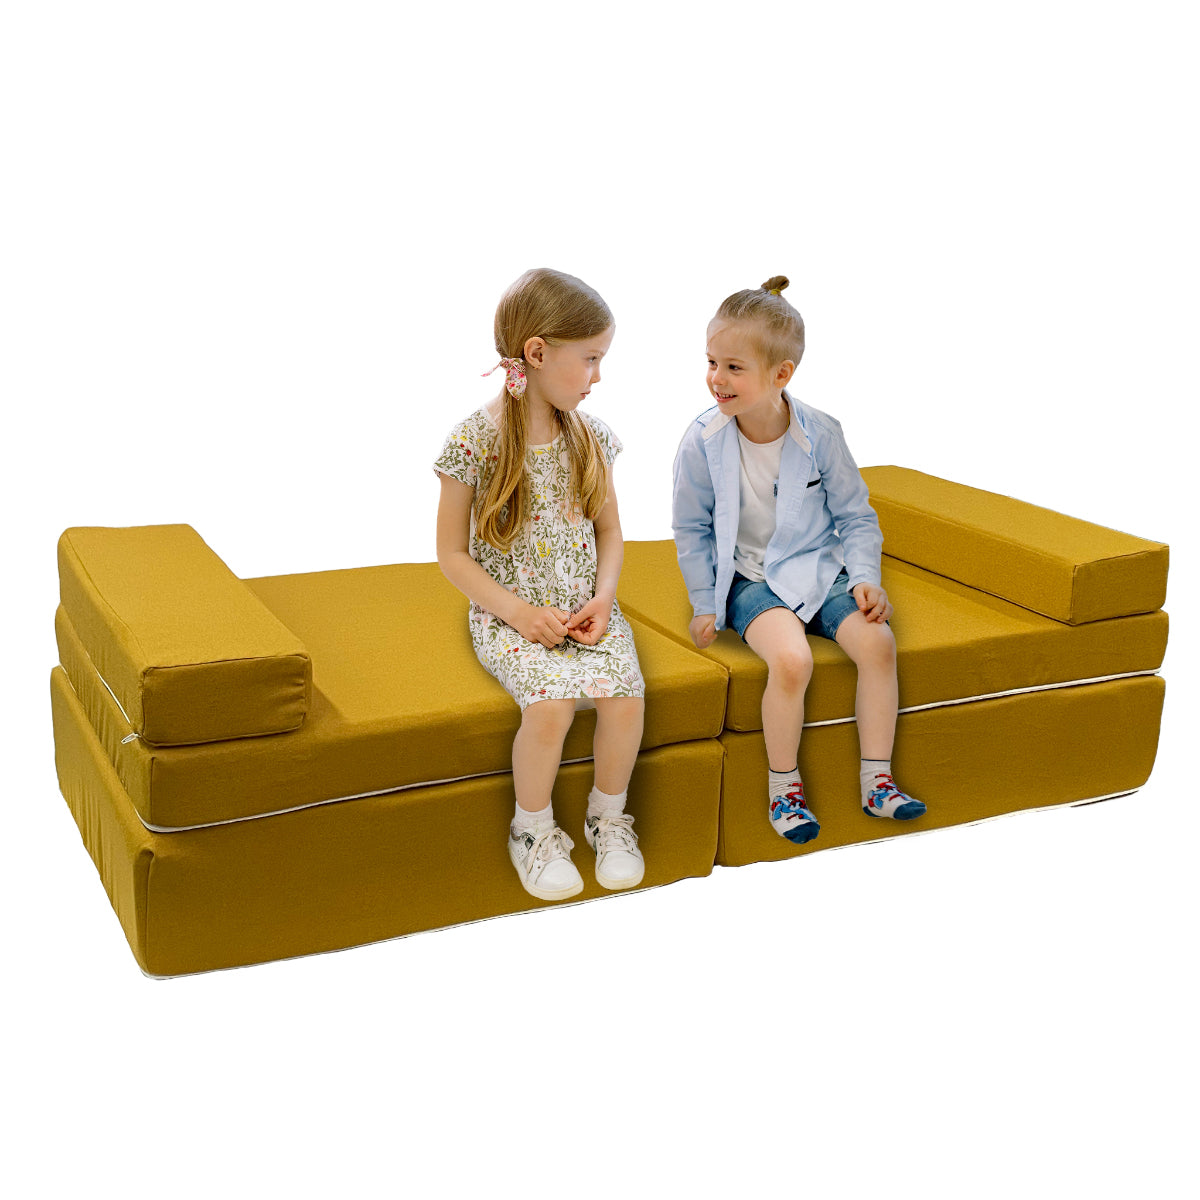 RIWI play couch soft play XXL